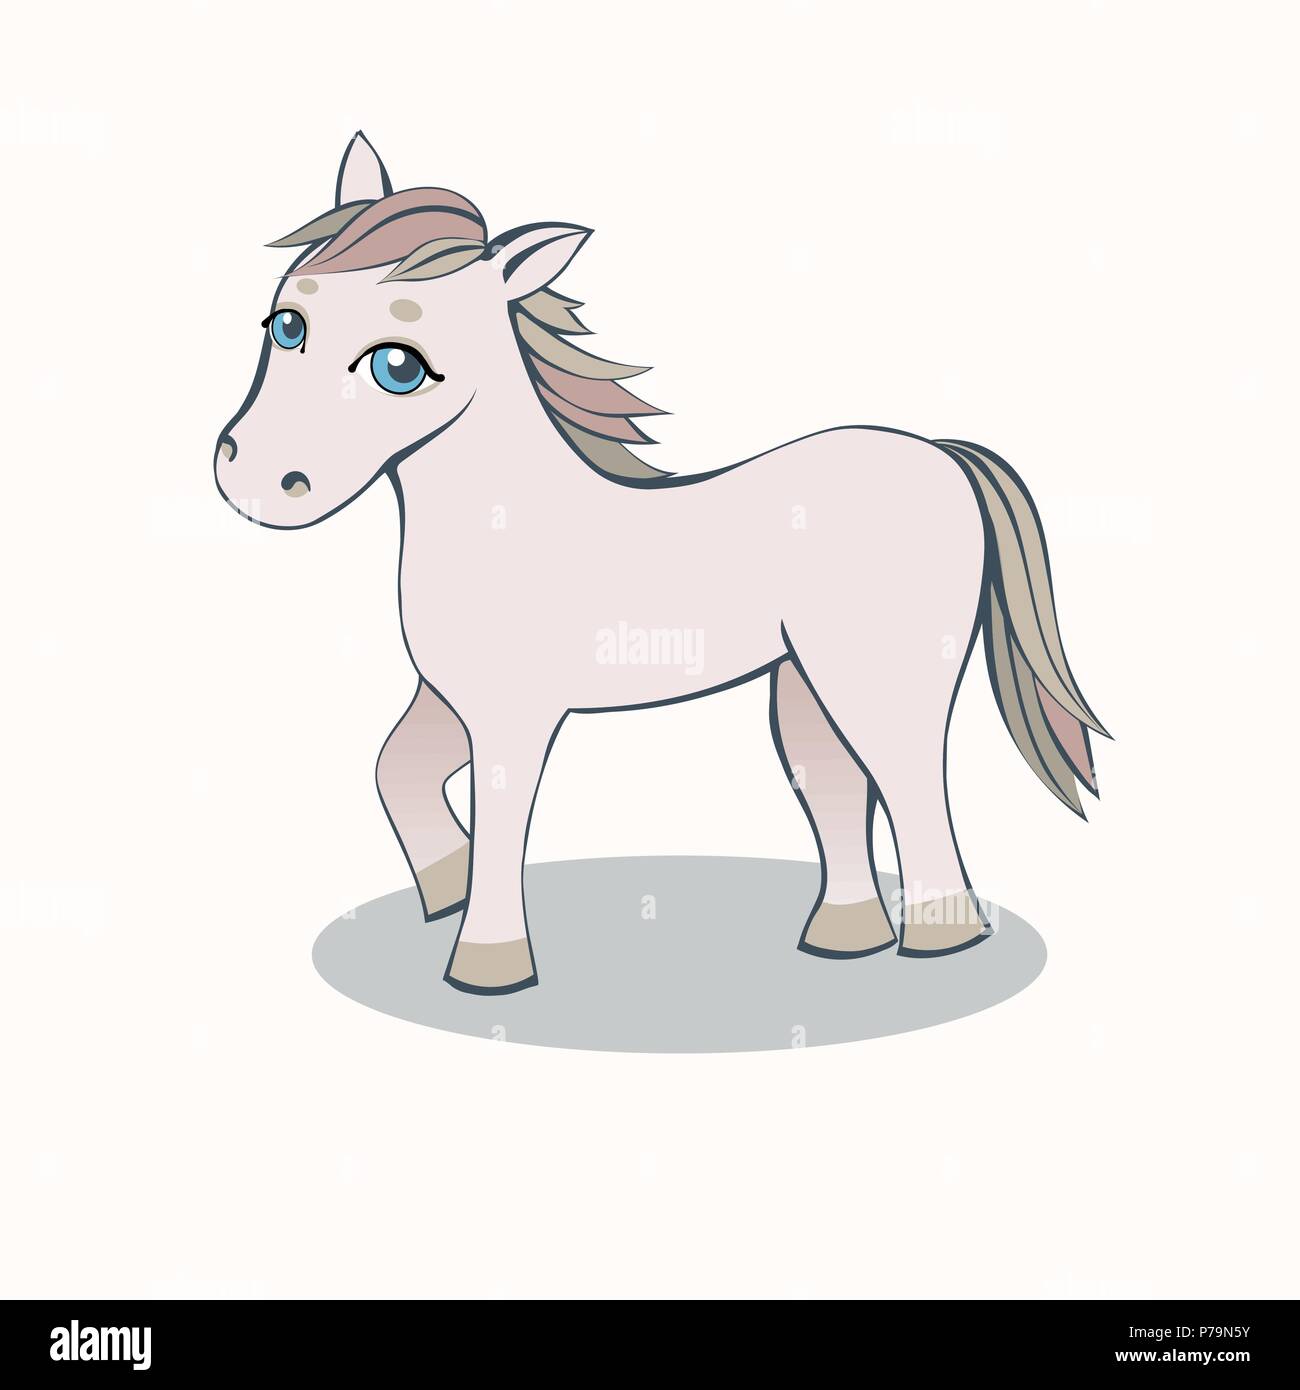 Small Horse Cartoon pink with blue eyes on a light background Stock Vector